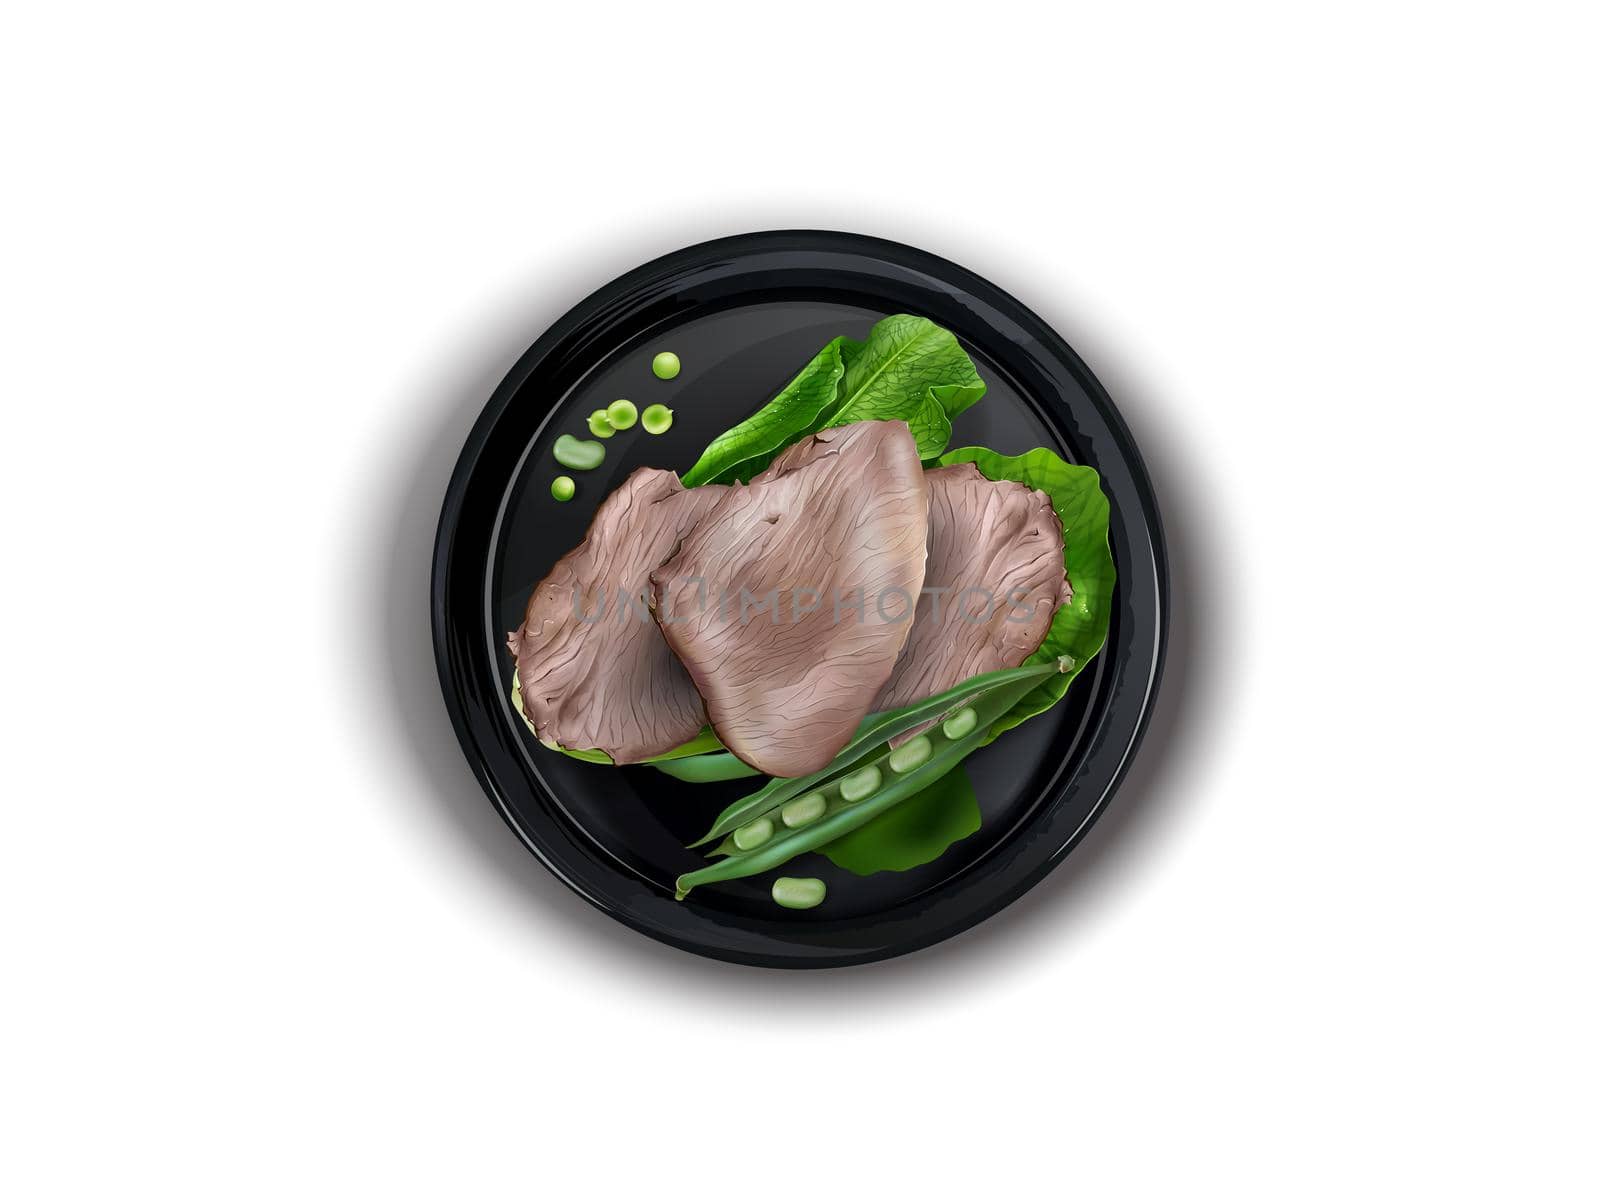 Boiled meat with beans, peas and lettuce on a black plate. by ConceptCafe